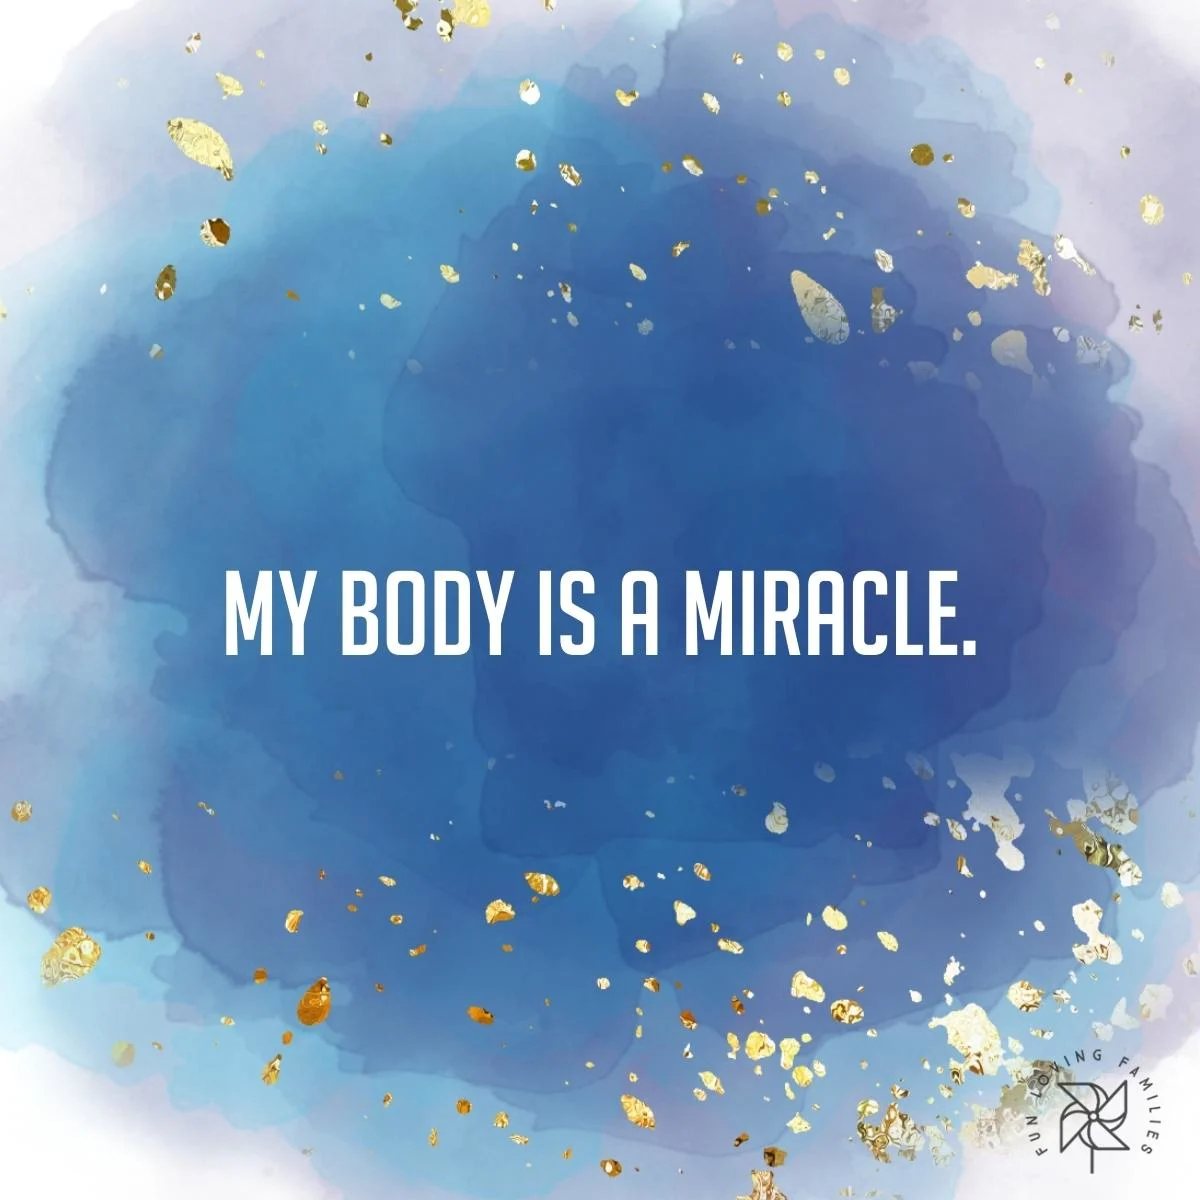 My body is a miracle affirmation